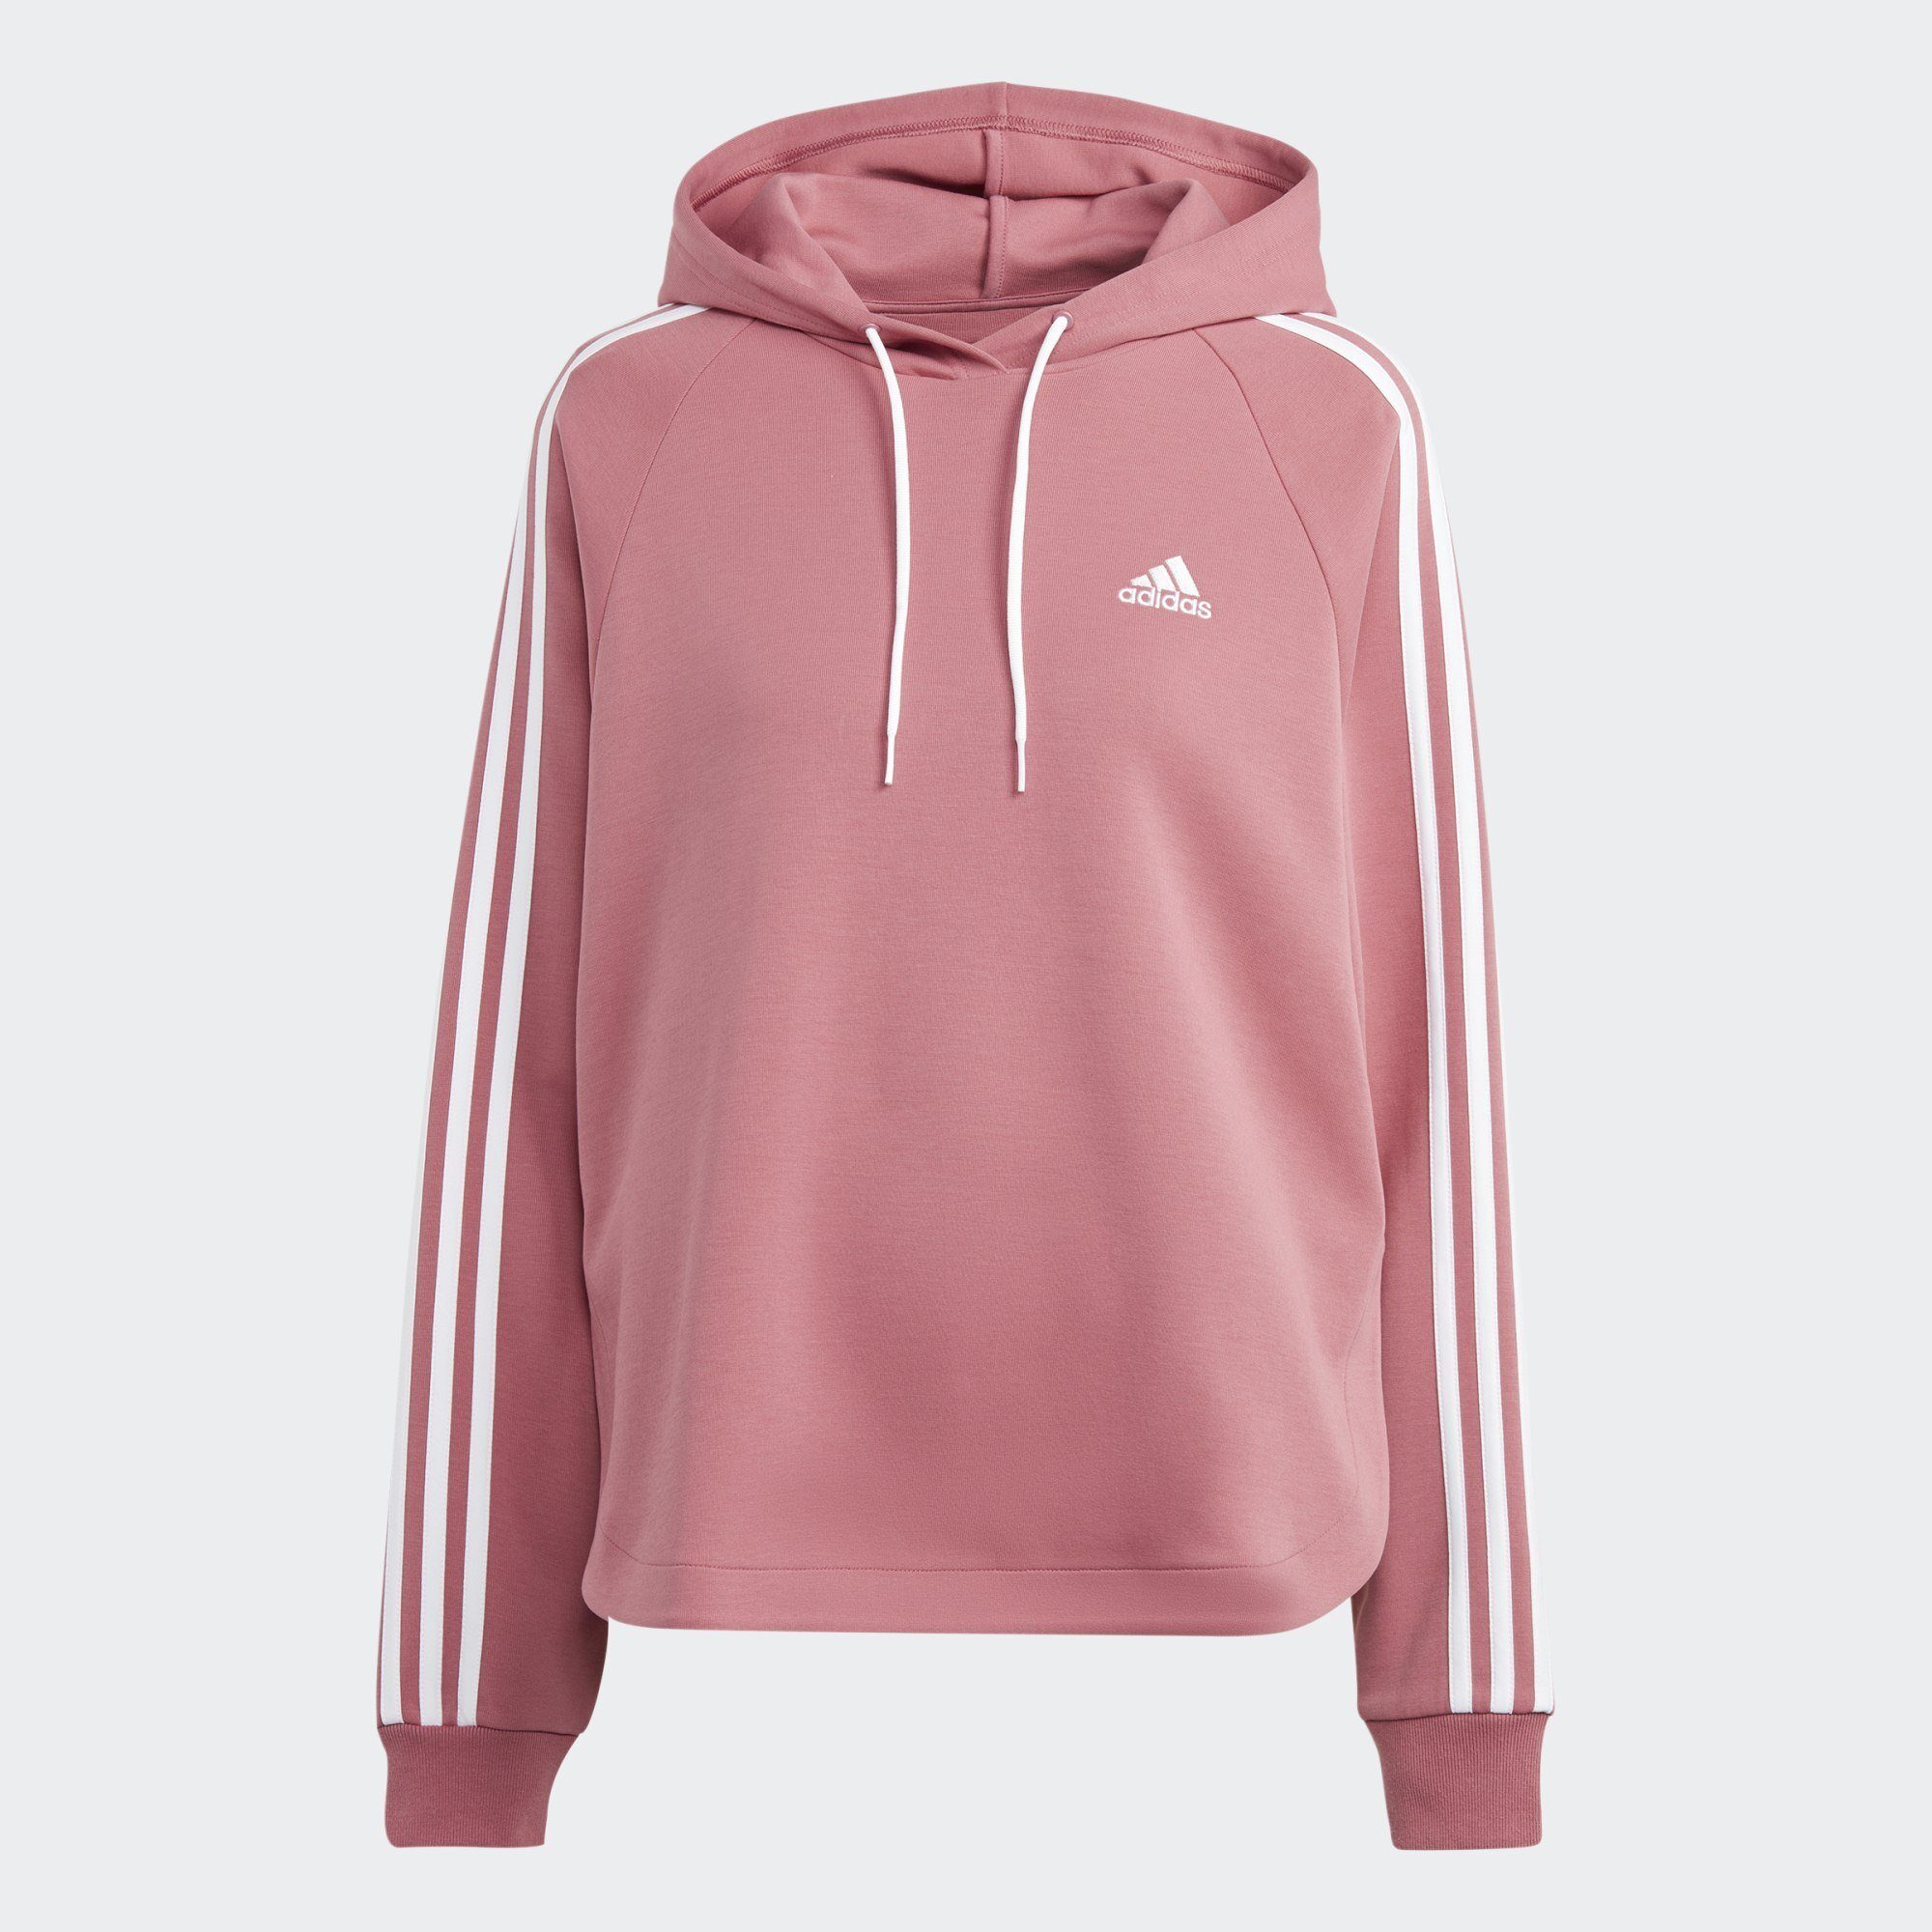 – Schwimmbrille / OVER-THE-HEAD Strata HOODIE White Sportswear UMSTANDSMODE Pink adidas MATERNITY